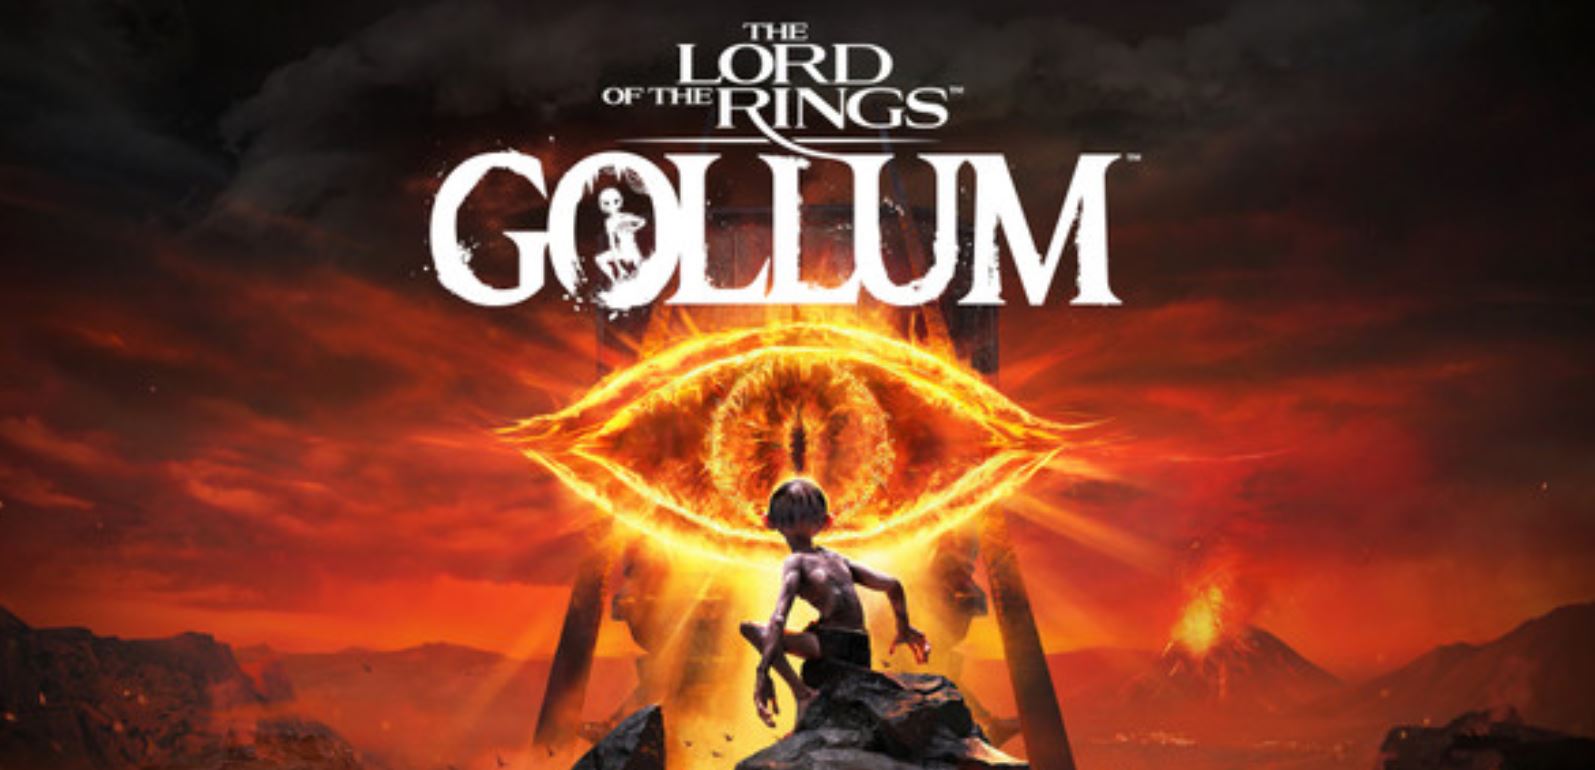 The Lord of the Rings Gollum Recensione 